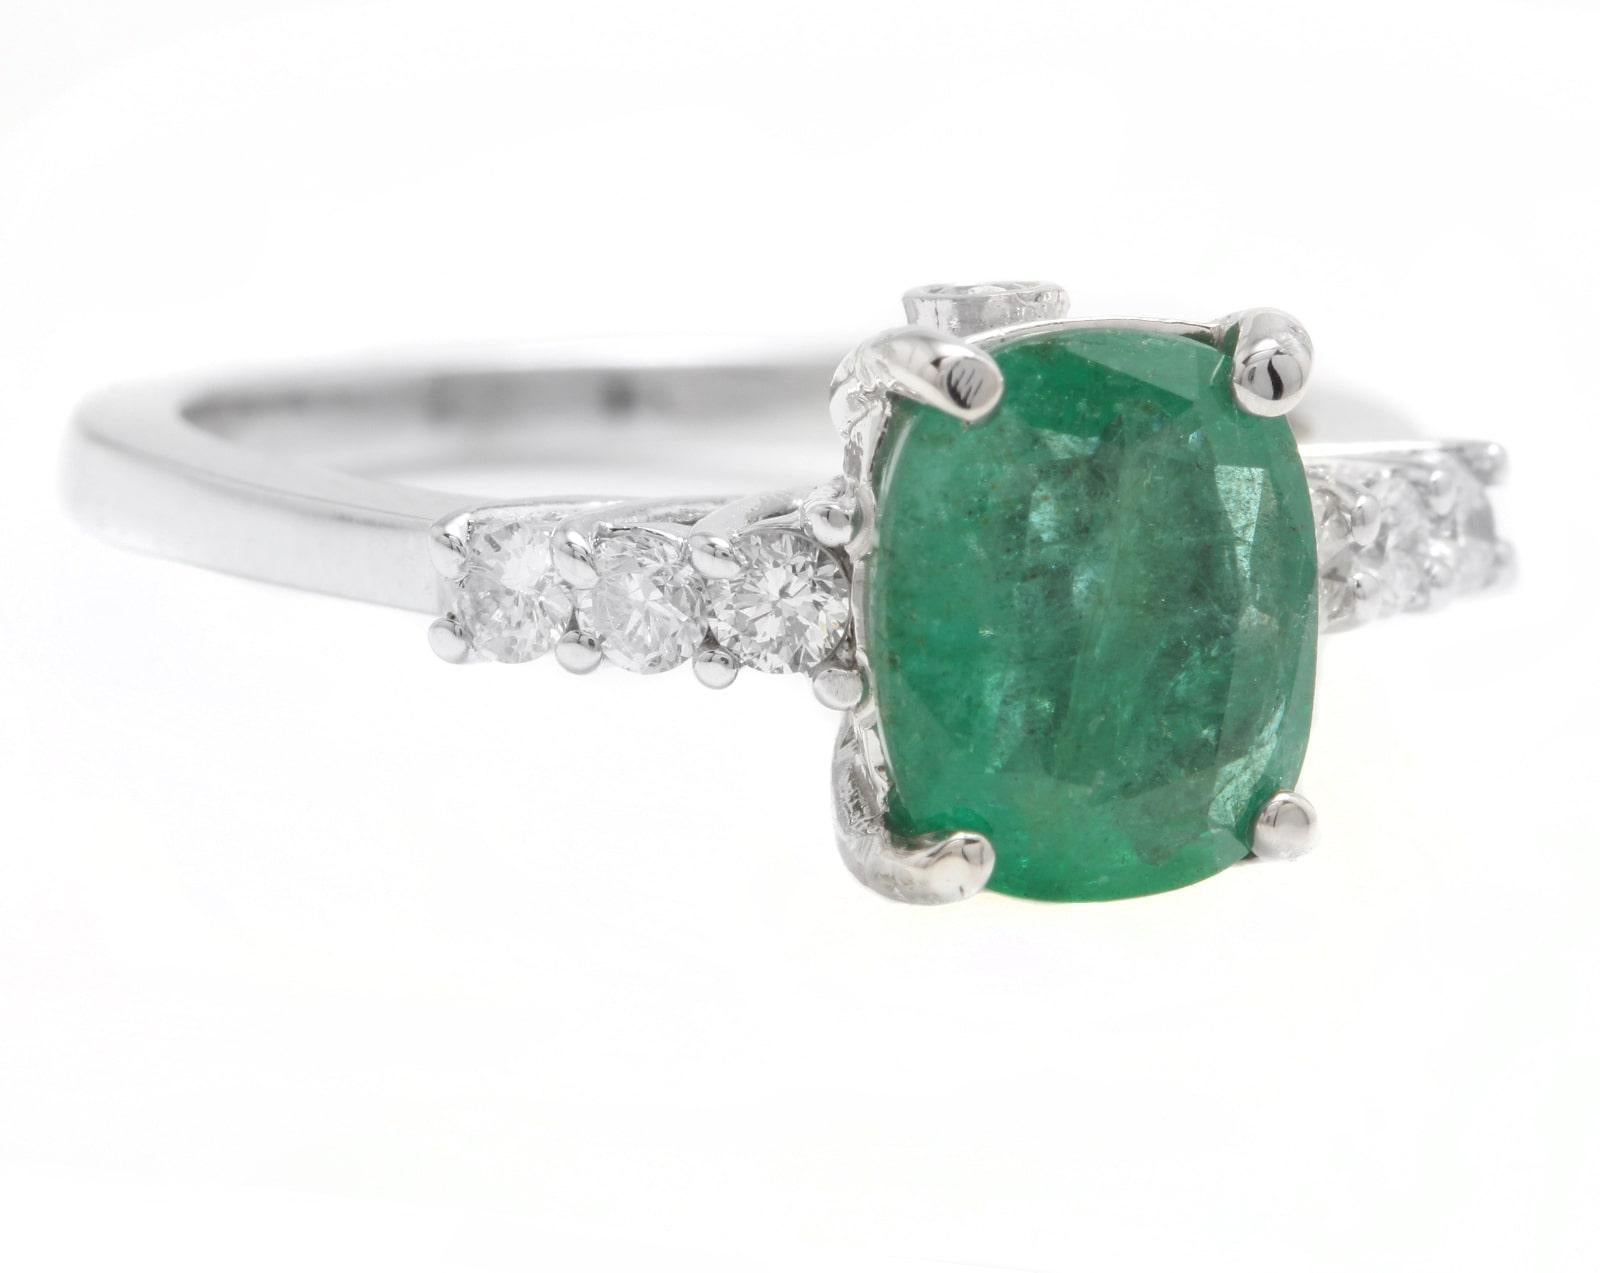 2.40 Carats Natural Emerald and Diamond 14K Solid White Gold Ring

Suggested Replacement Value: Approx. $5,500.00

Total Natural Green Emerald Weight is: Approx. 2.00 Carats (transparent)

Emerald Measures: Approx. 9.00 x 7.00mm

Emerald Treatment: